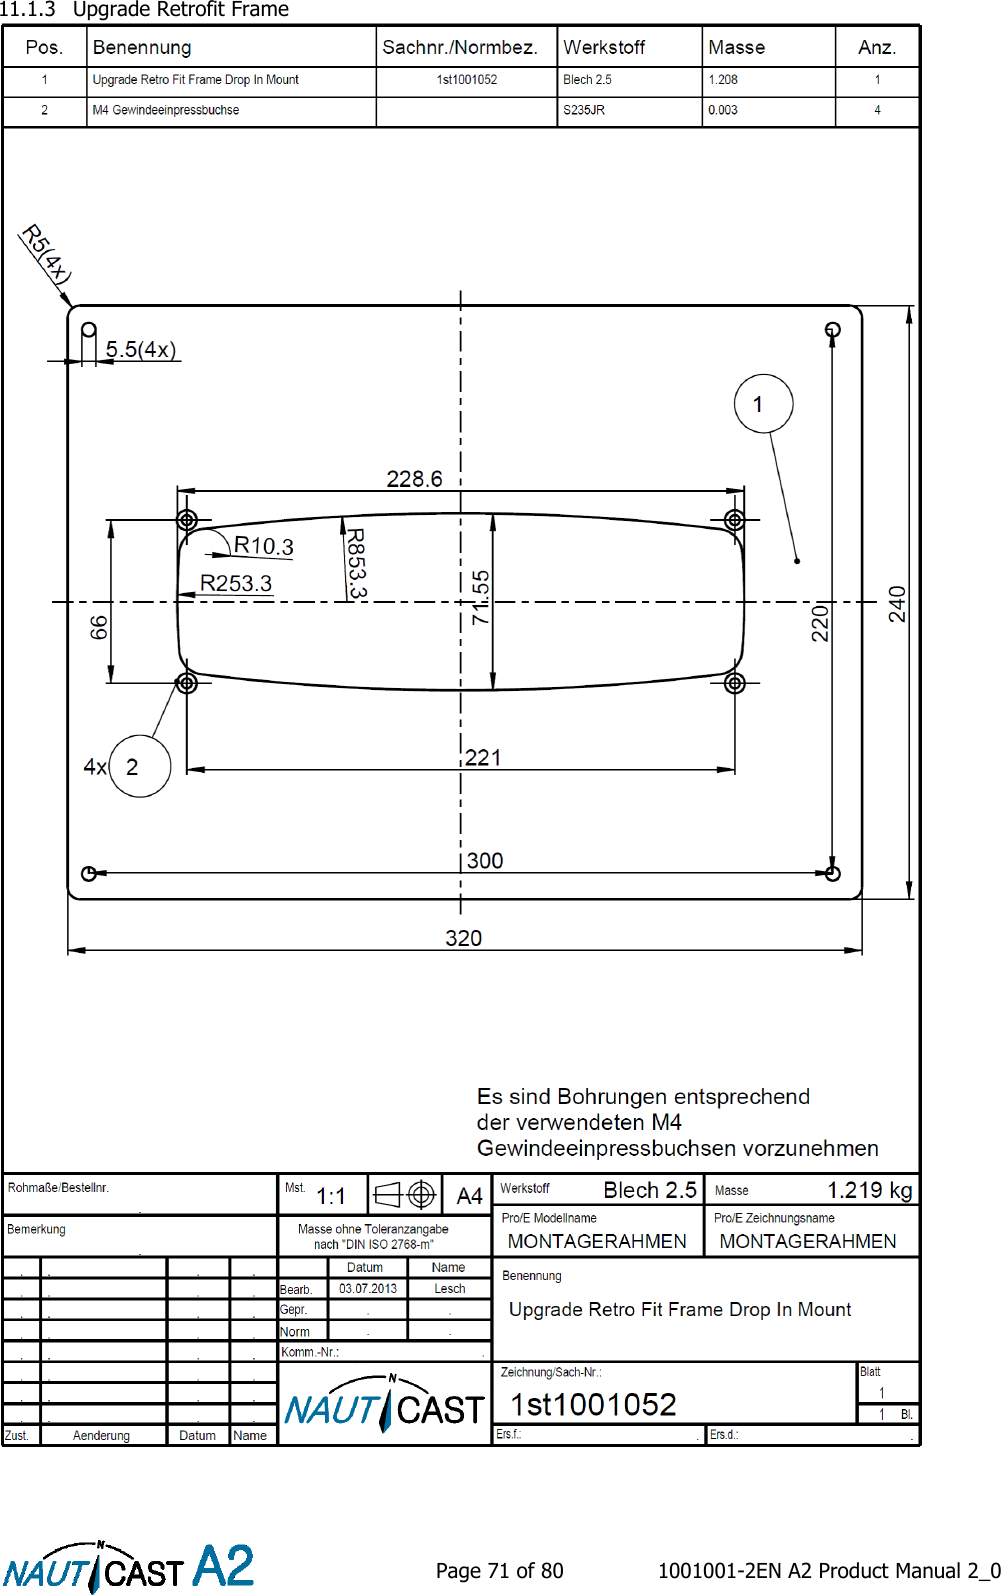    Page 71 of 80  1001001-2EN A2 Product Manual 2_0   11.1.3 Upgrade Retrofit Frame  